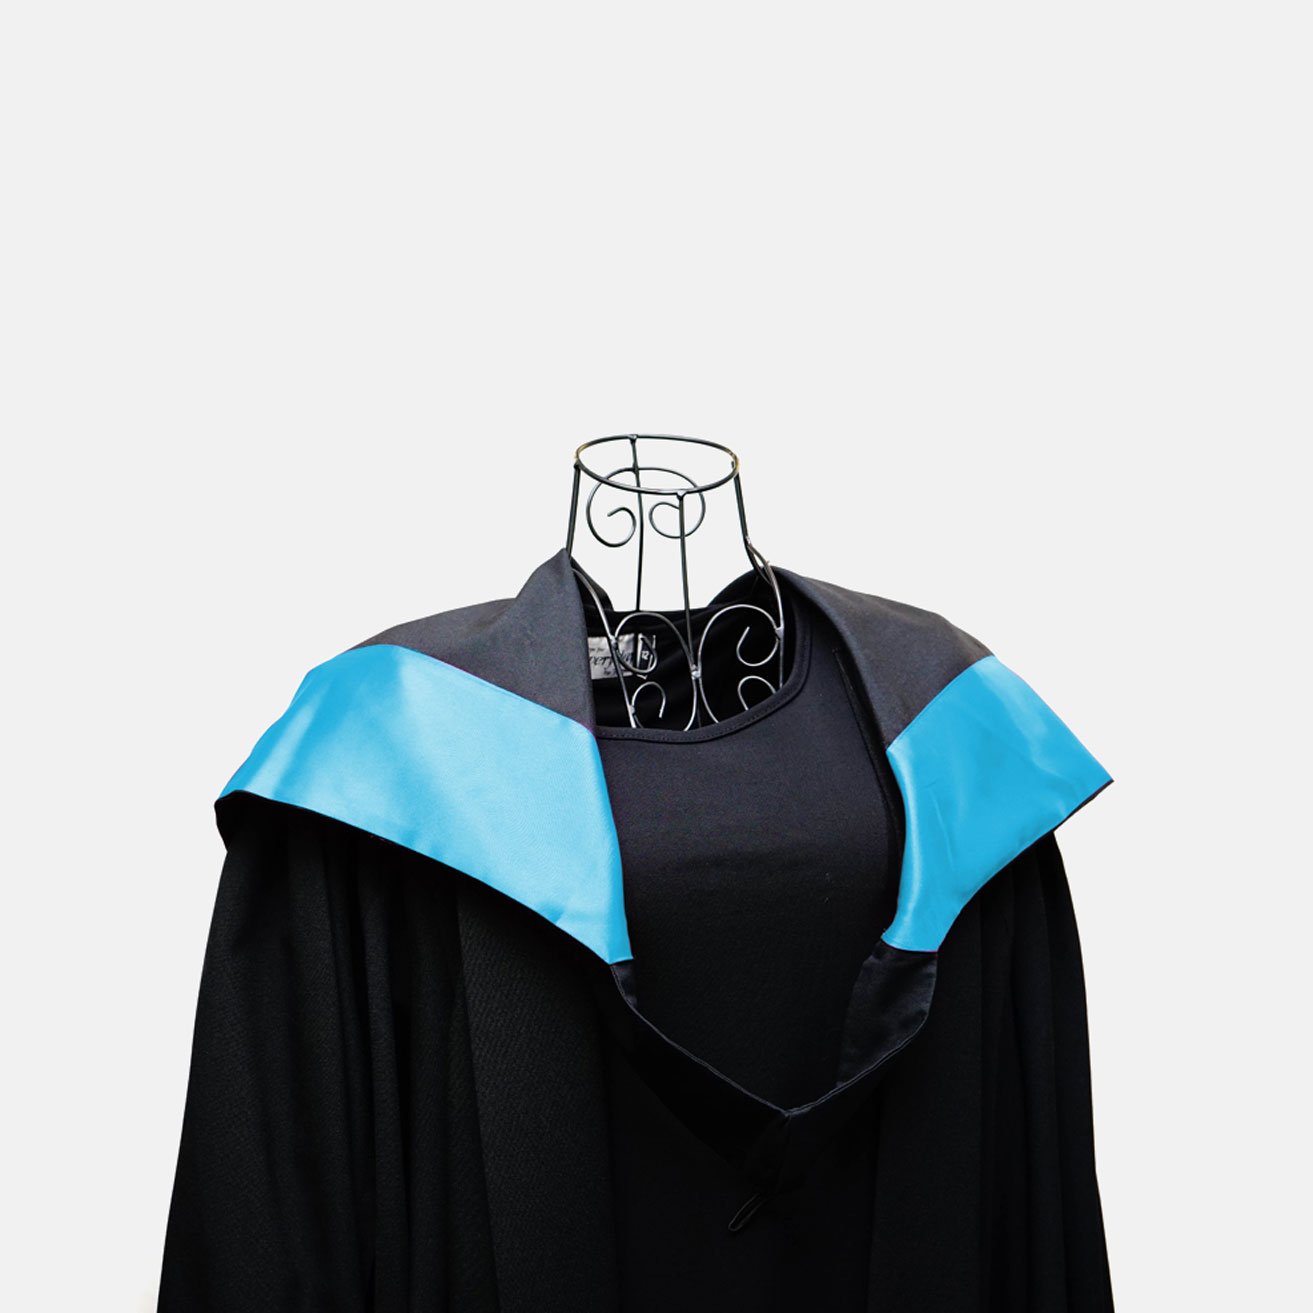 Buy Kaku Fancy Dresses Graduation Gown With Hat & Stole/Scarf | Degree  Costume For Convocation Dress For Boys & Girls (Blue, 3-4 Years) Online at  Low Prices in India - Amazon.in